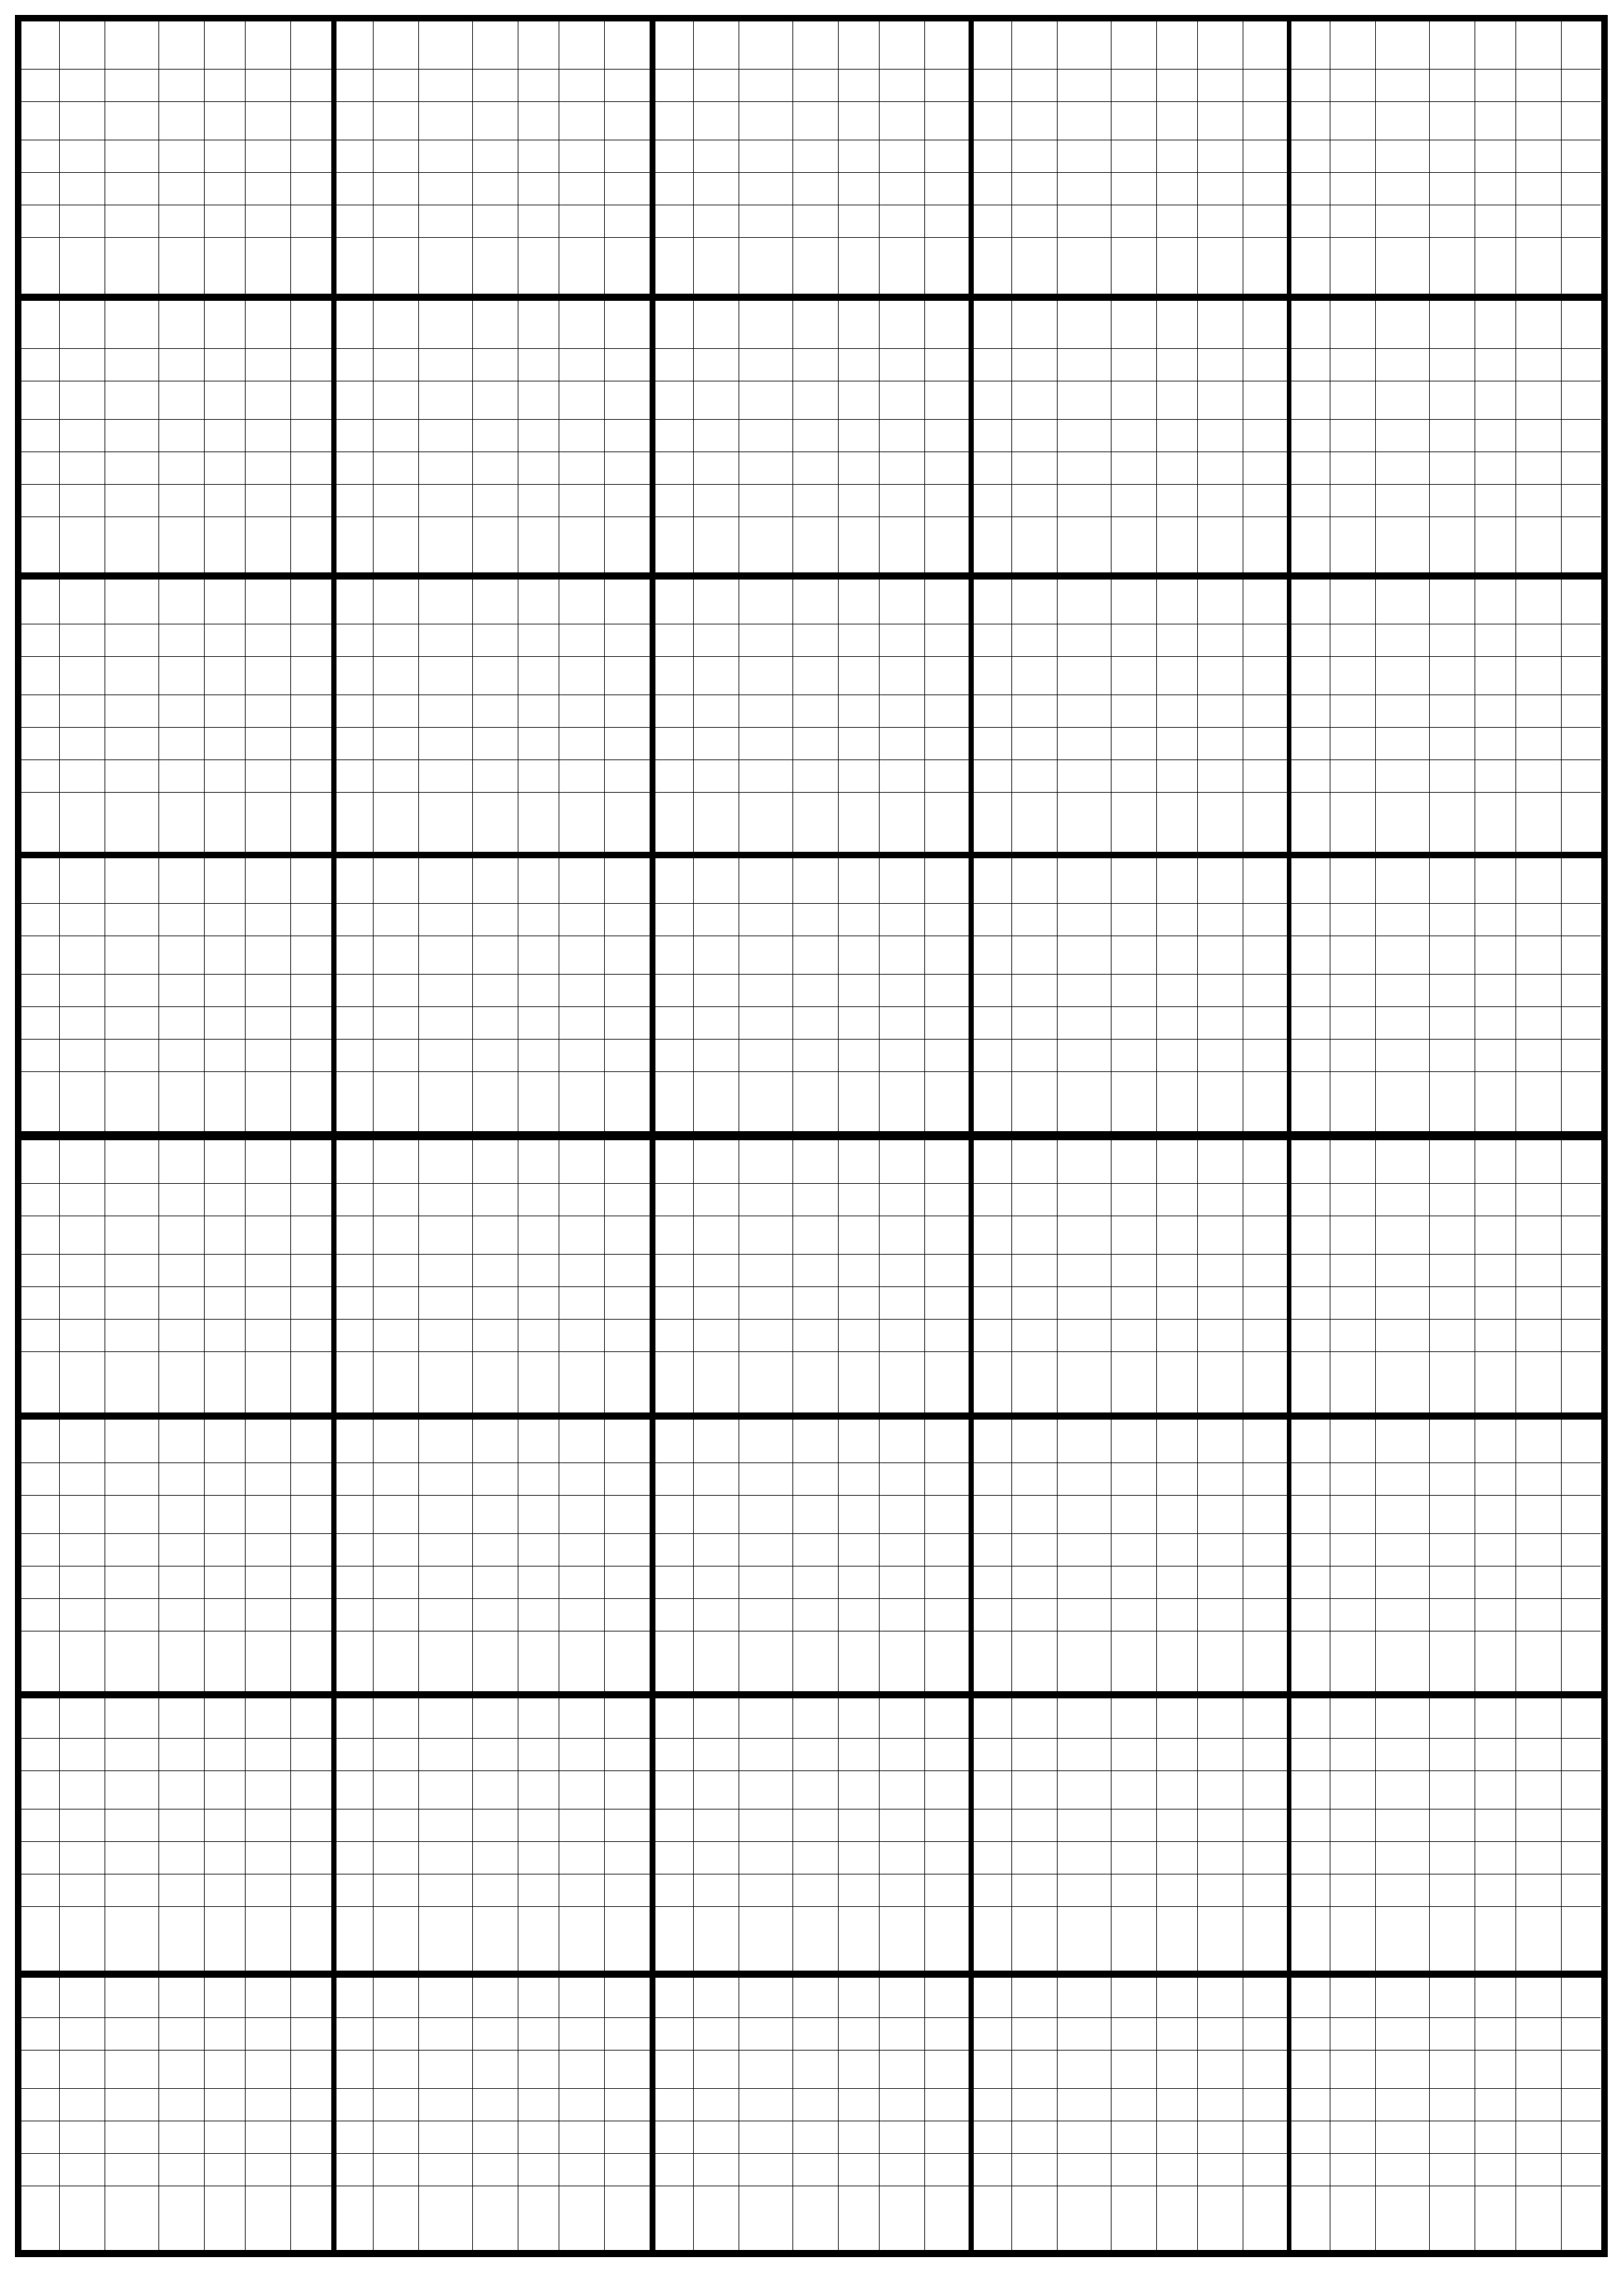 5+ Printable Centimeter Graph Paper Templates HowToWiki